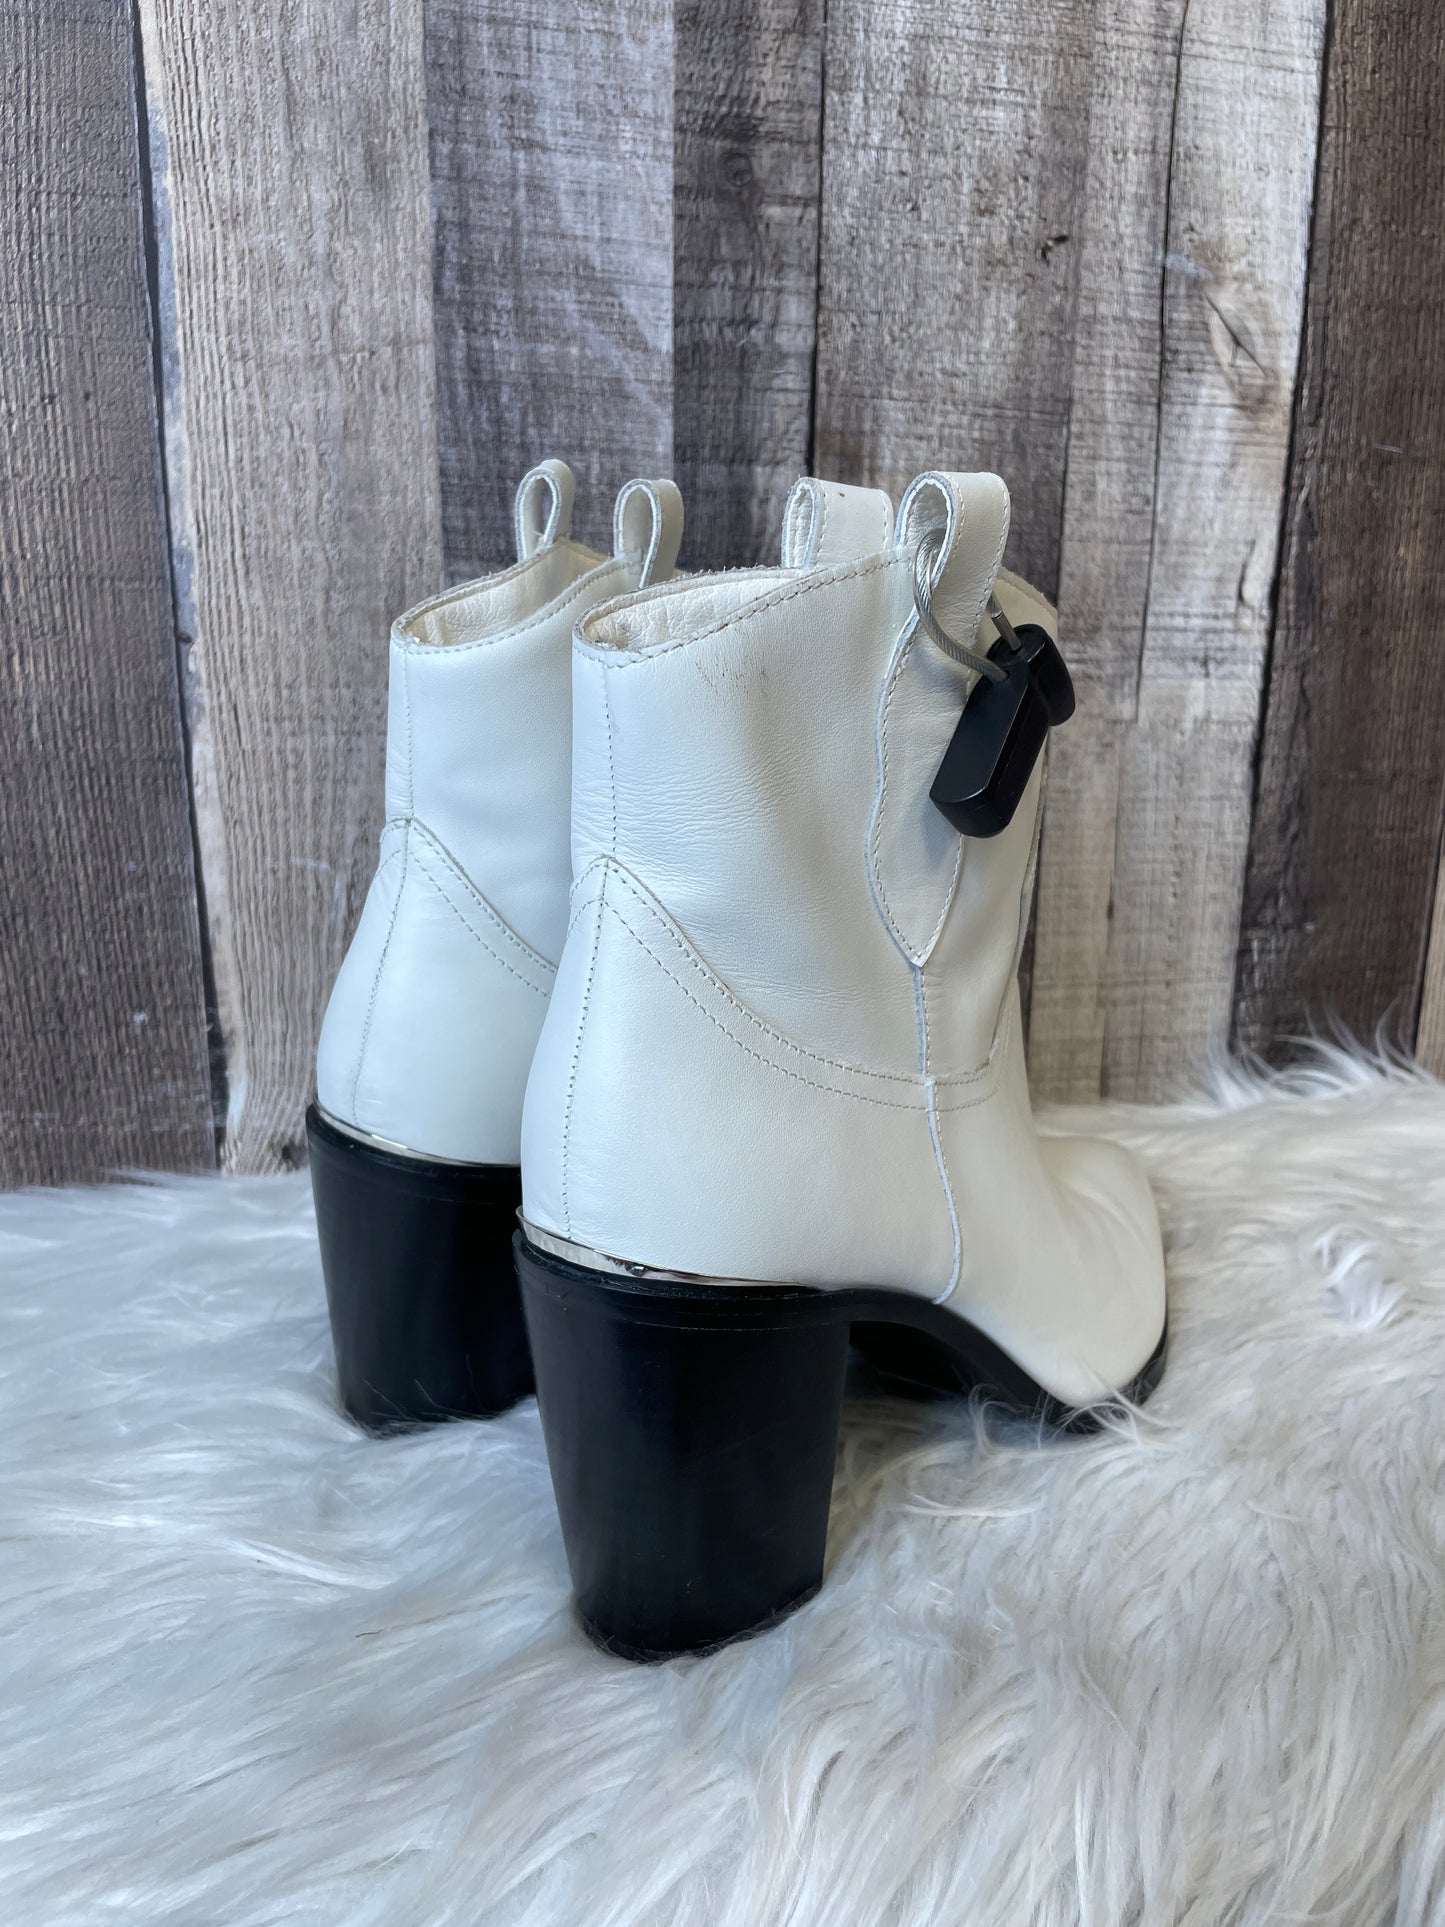 Boots Ankle Heels By Steve Madden  Size: 8.5